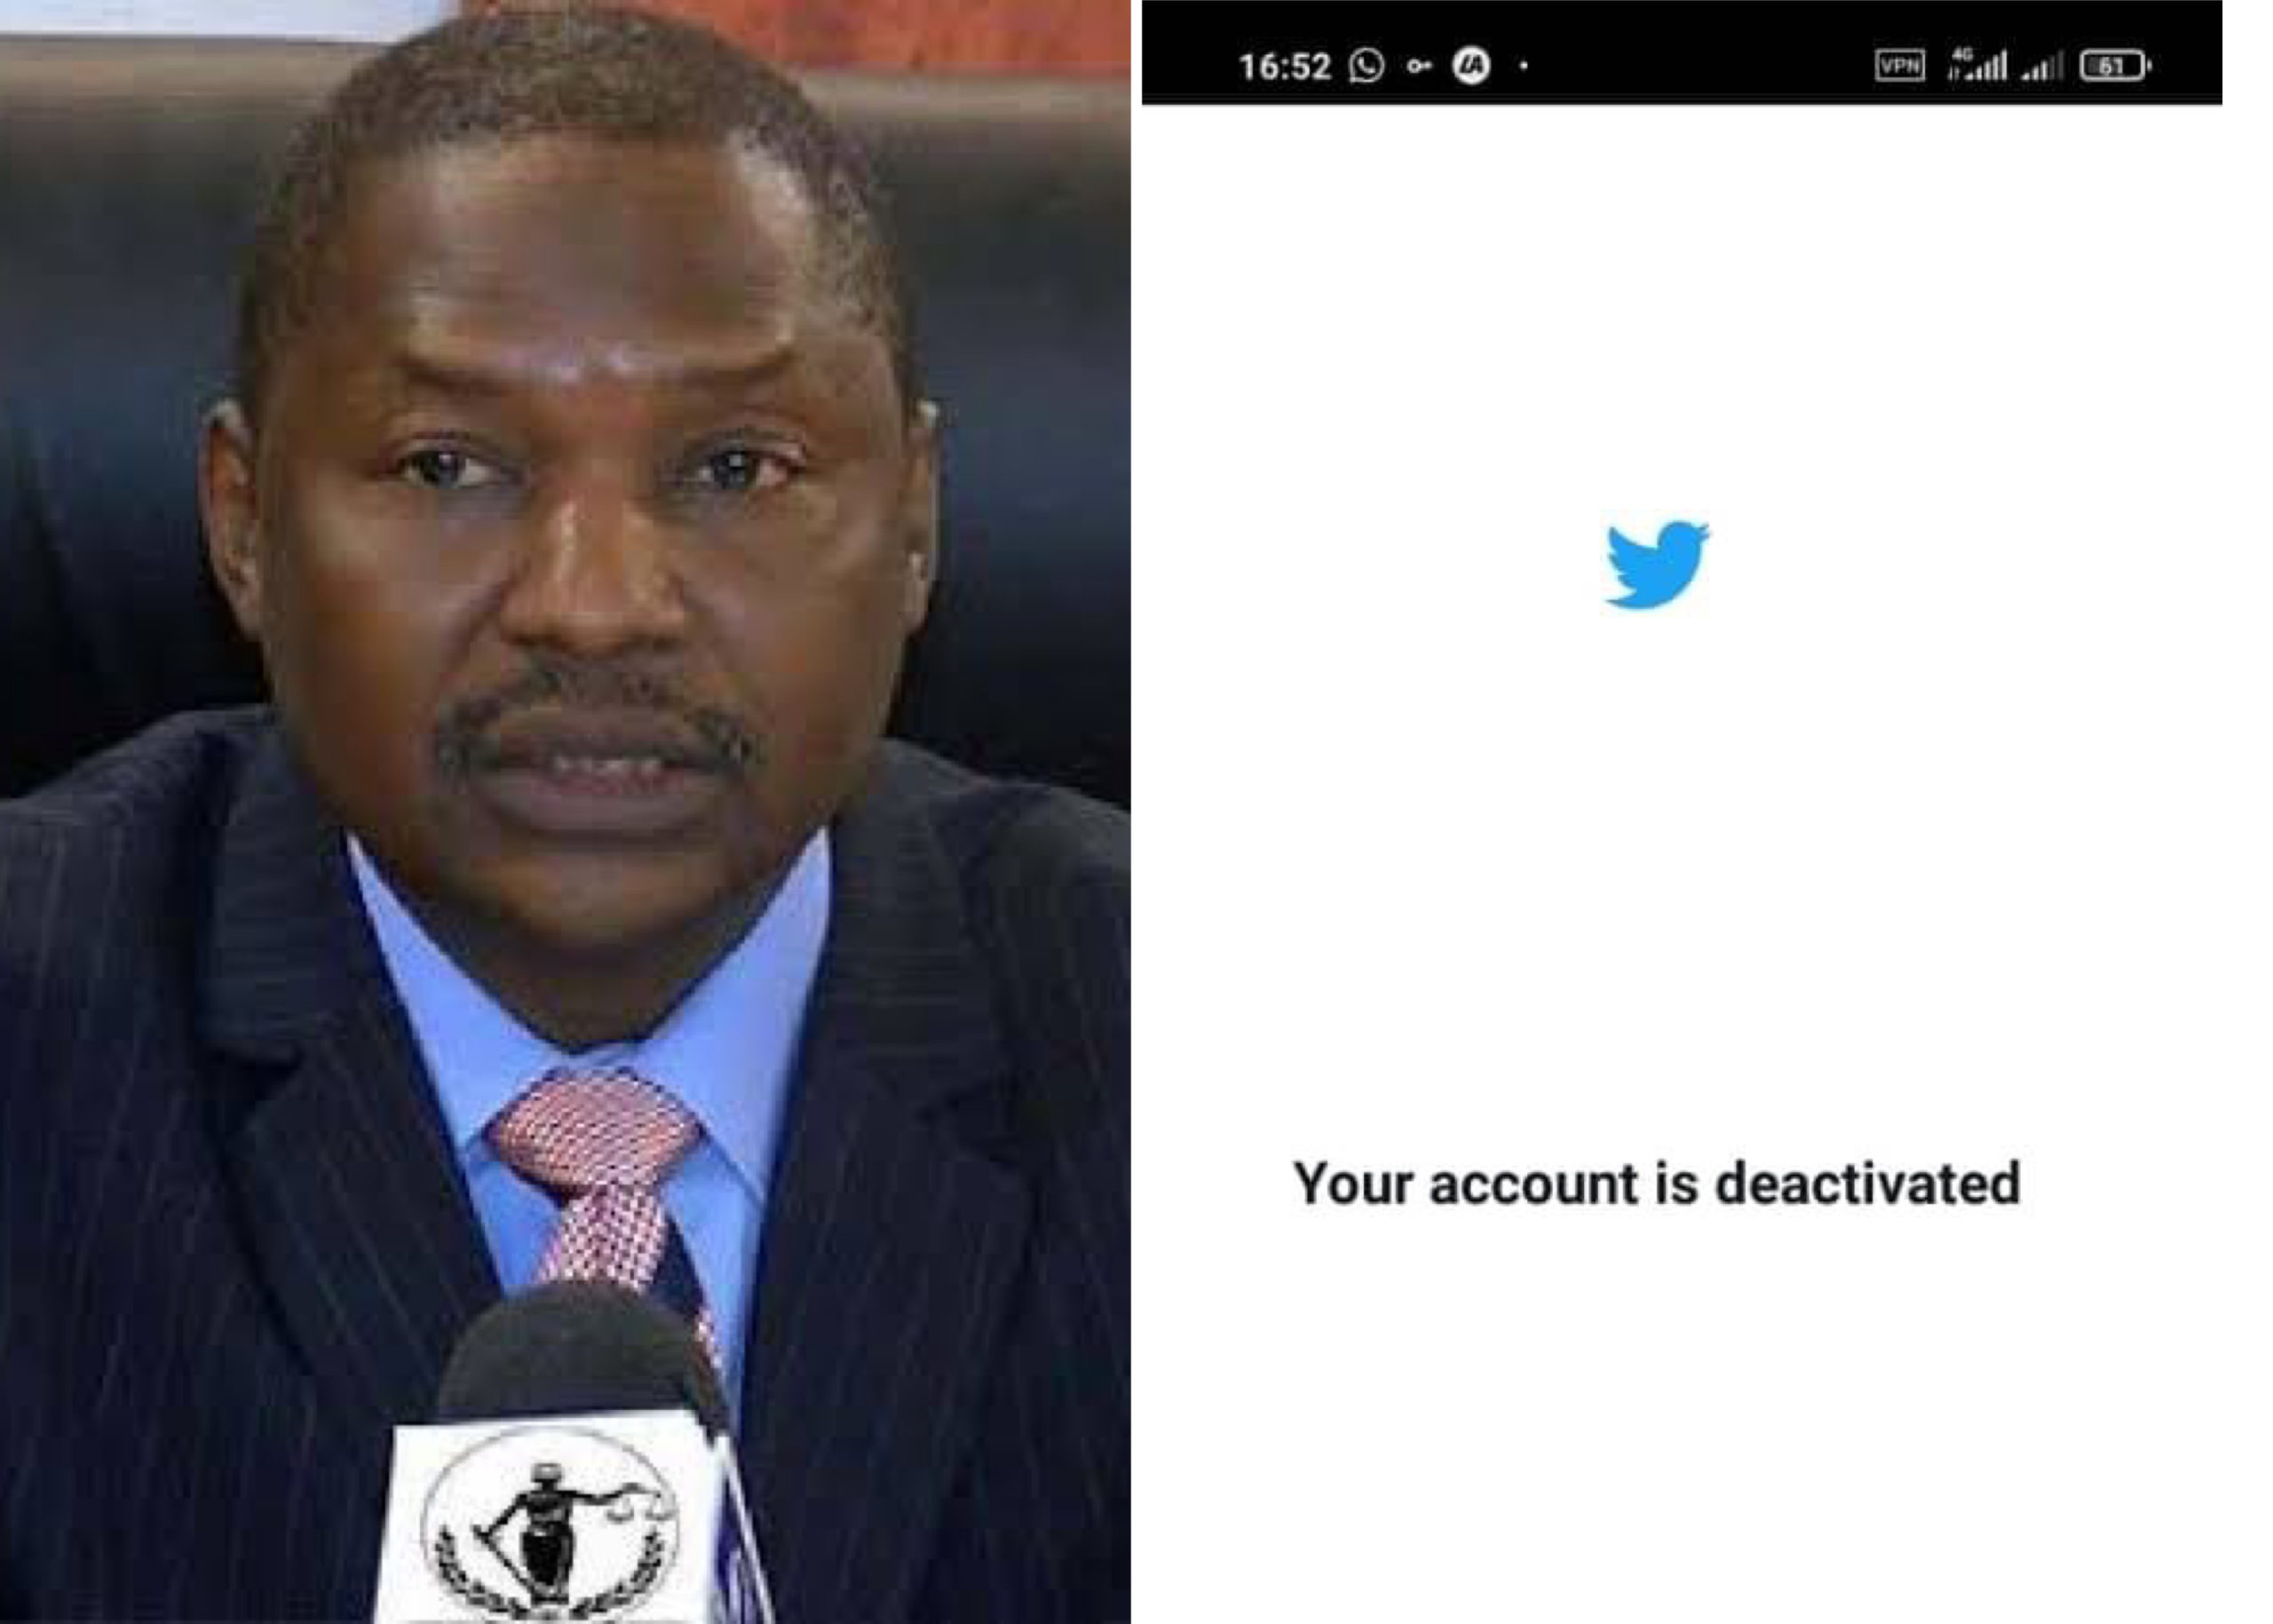 Using VPN, AGF Malami Logs Into Twitter To Deactivate Account